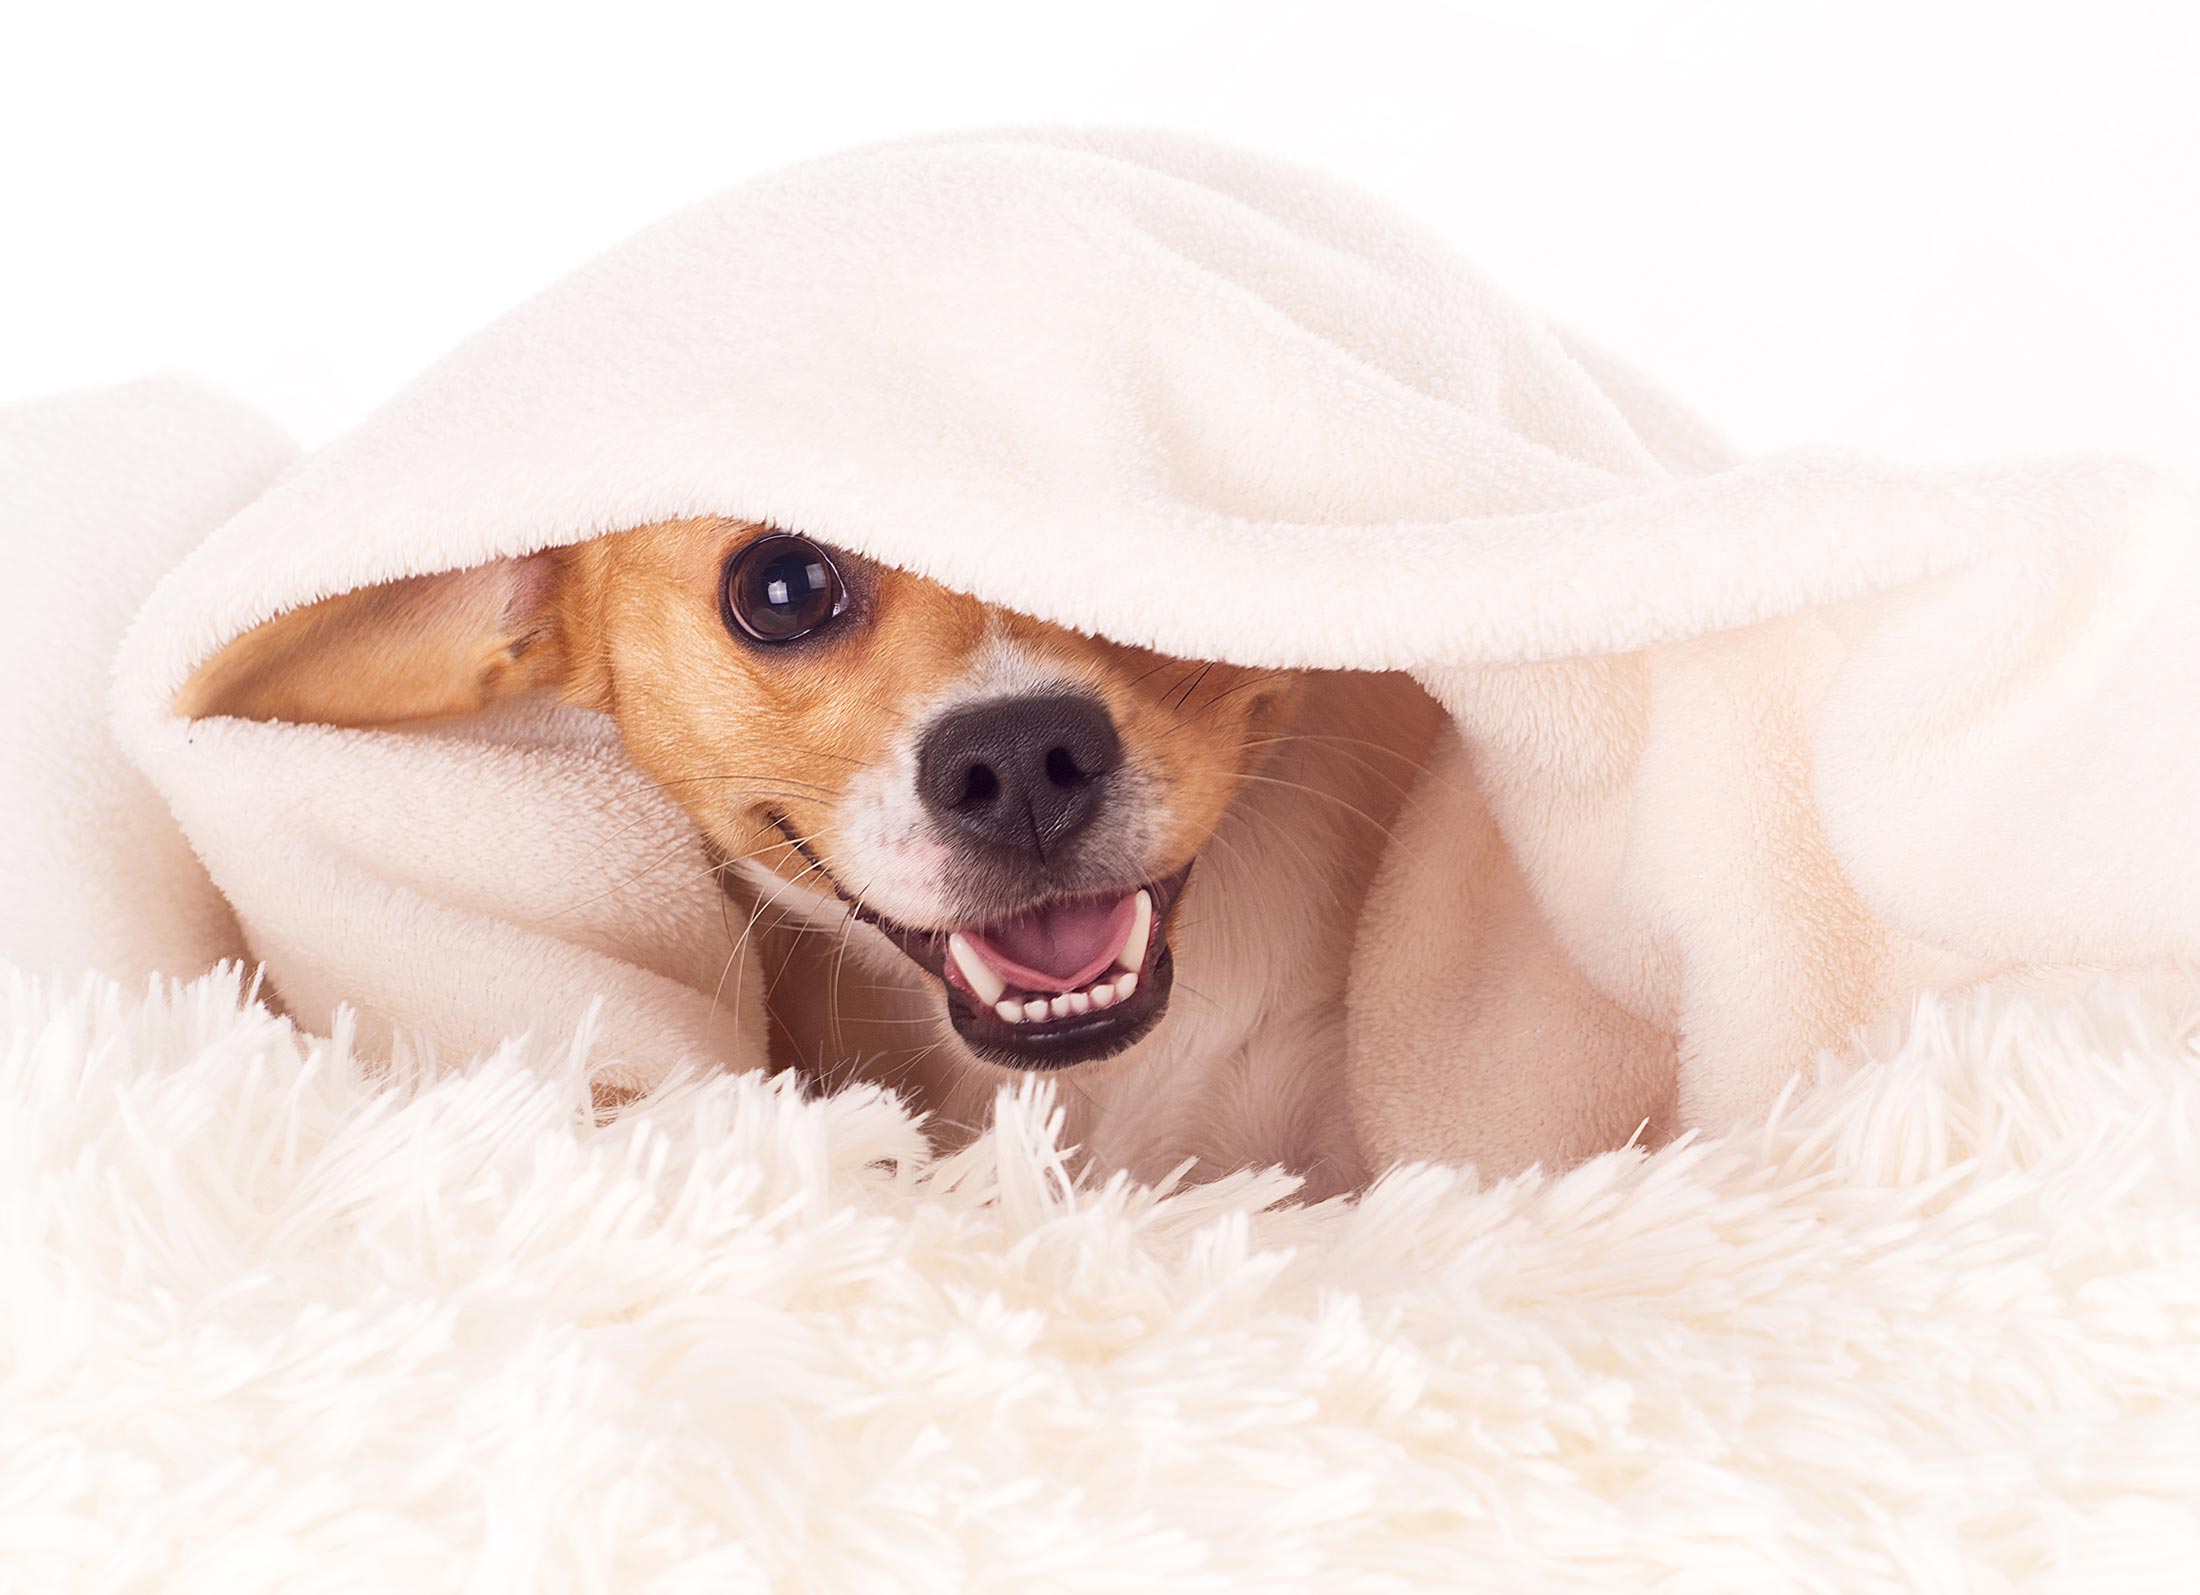 Little dog peeking out from under a blanket in our white studio. Captured by New Generation Portraits Ltd